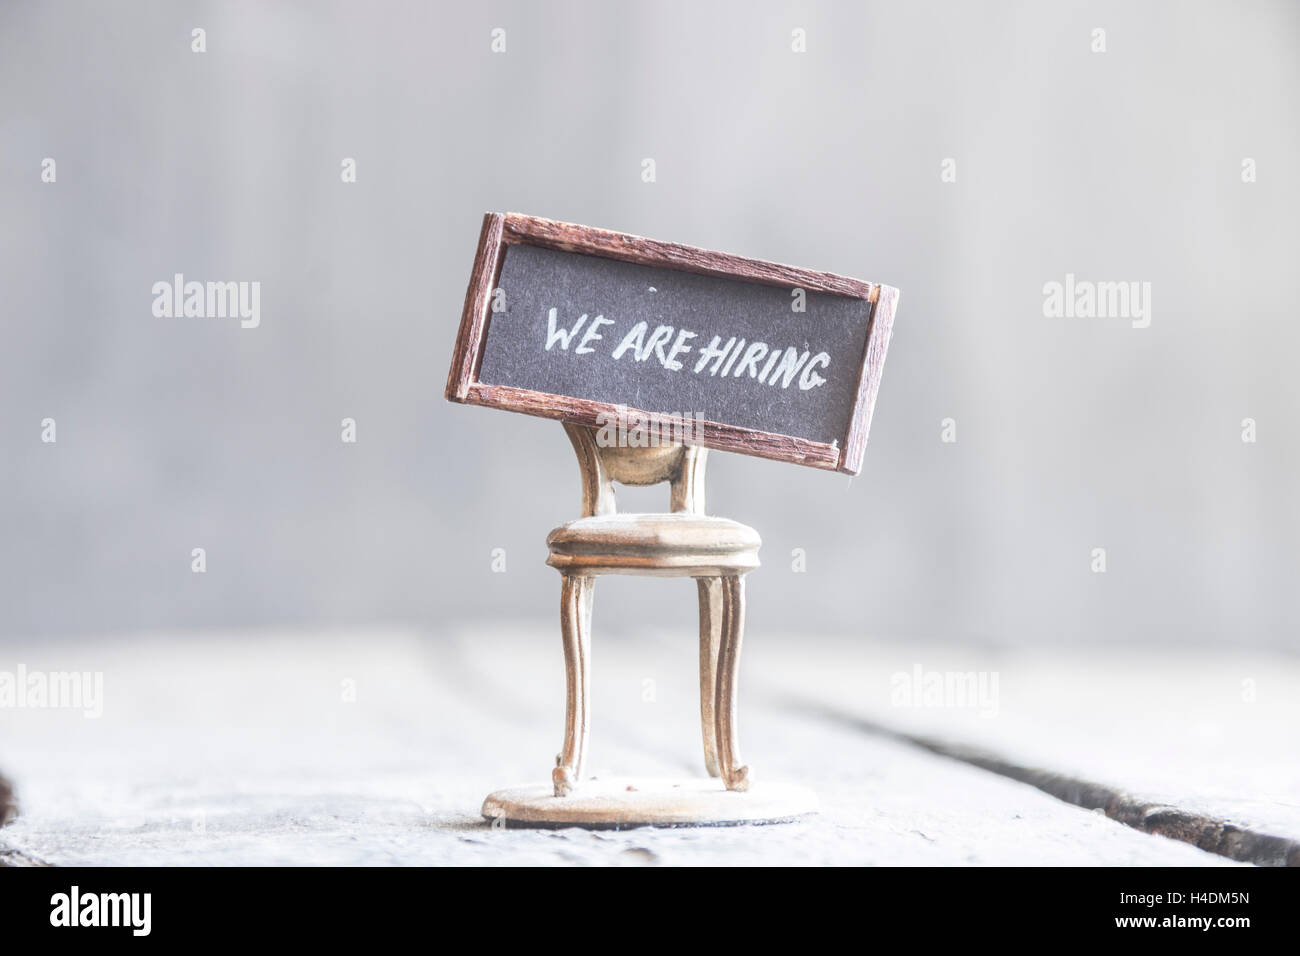 We're hiring idea, text and chair, retro style. Stock Photo